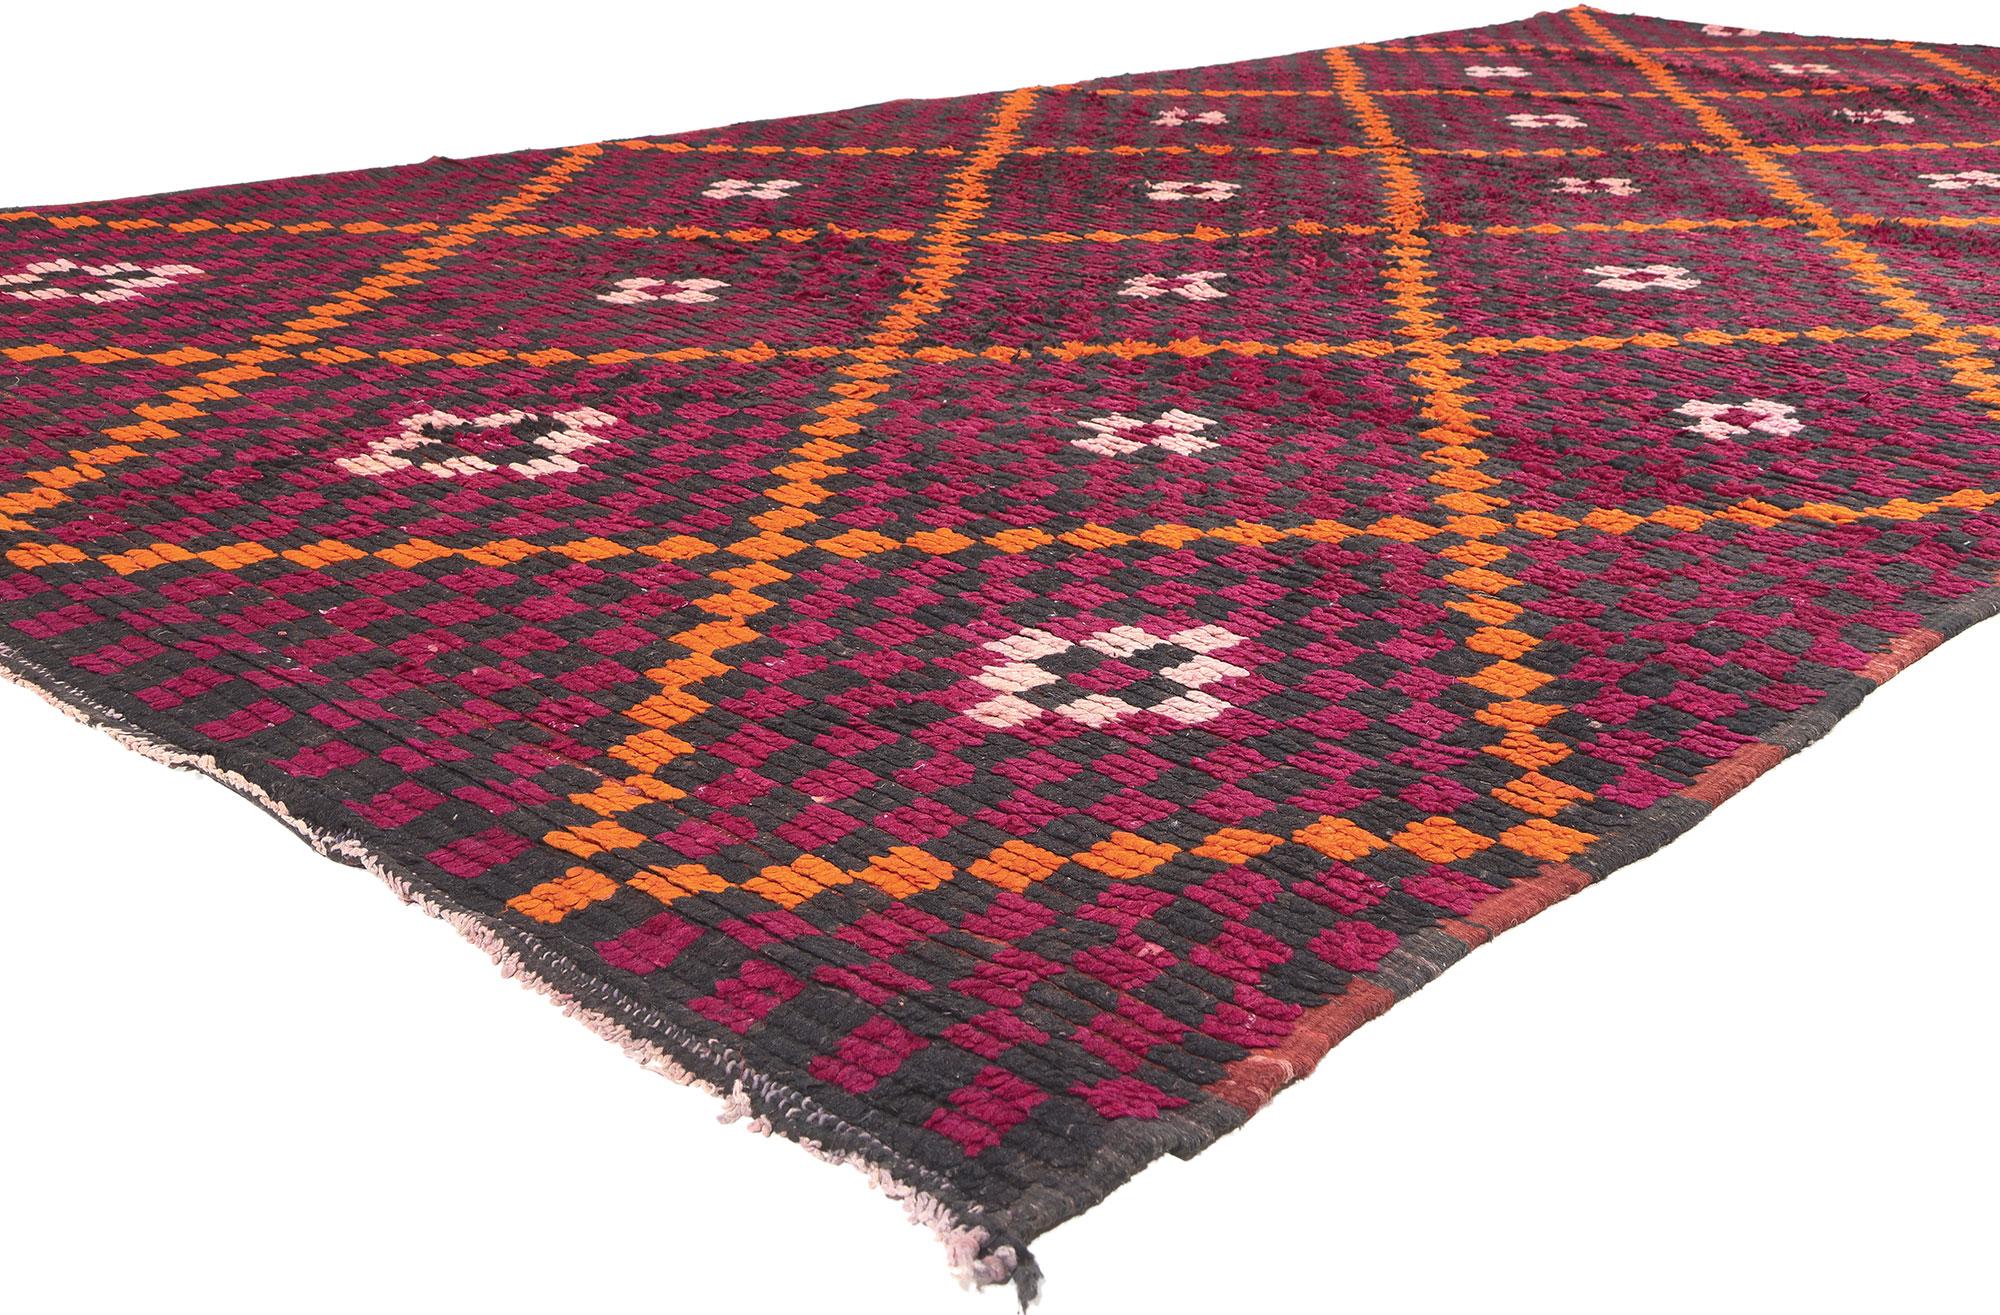 20226 Vintage Talsint Moroccan Rug, 07'01 x 14'06
In a seamless fusion of Mid-Century Modern style and nomadic charm with a distinctive checkered pattern, this hand knotted wool vintage Talsint Moroccan rug not only harmonizes with modern